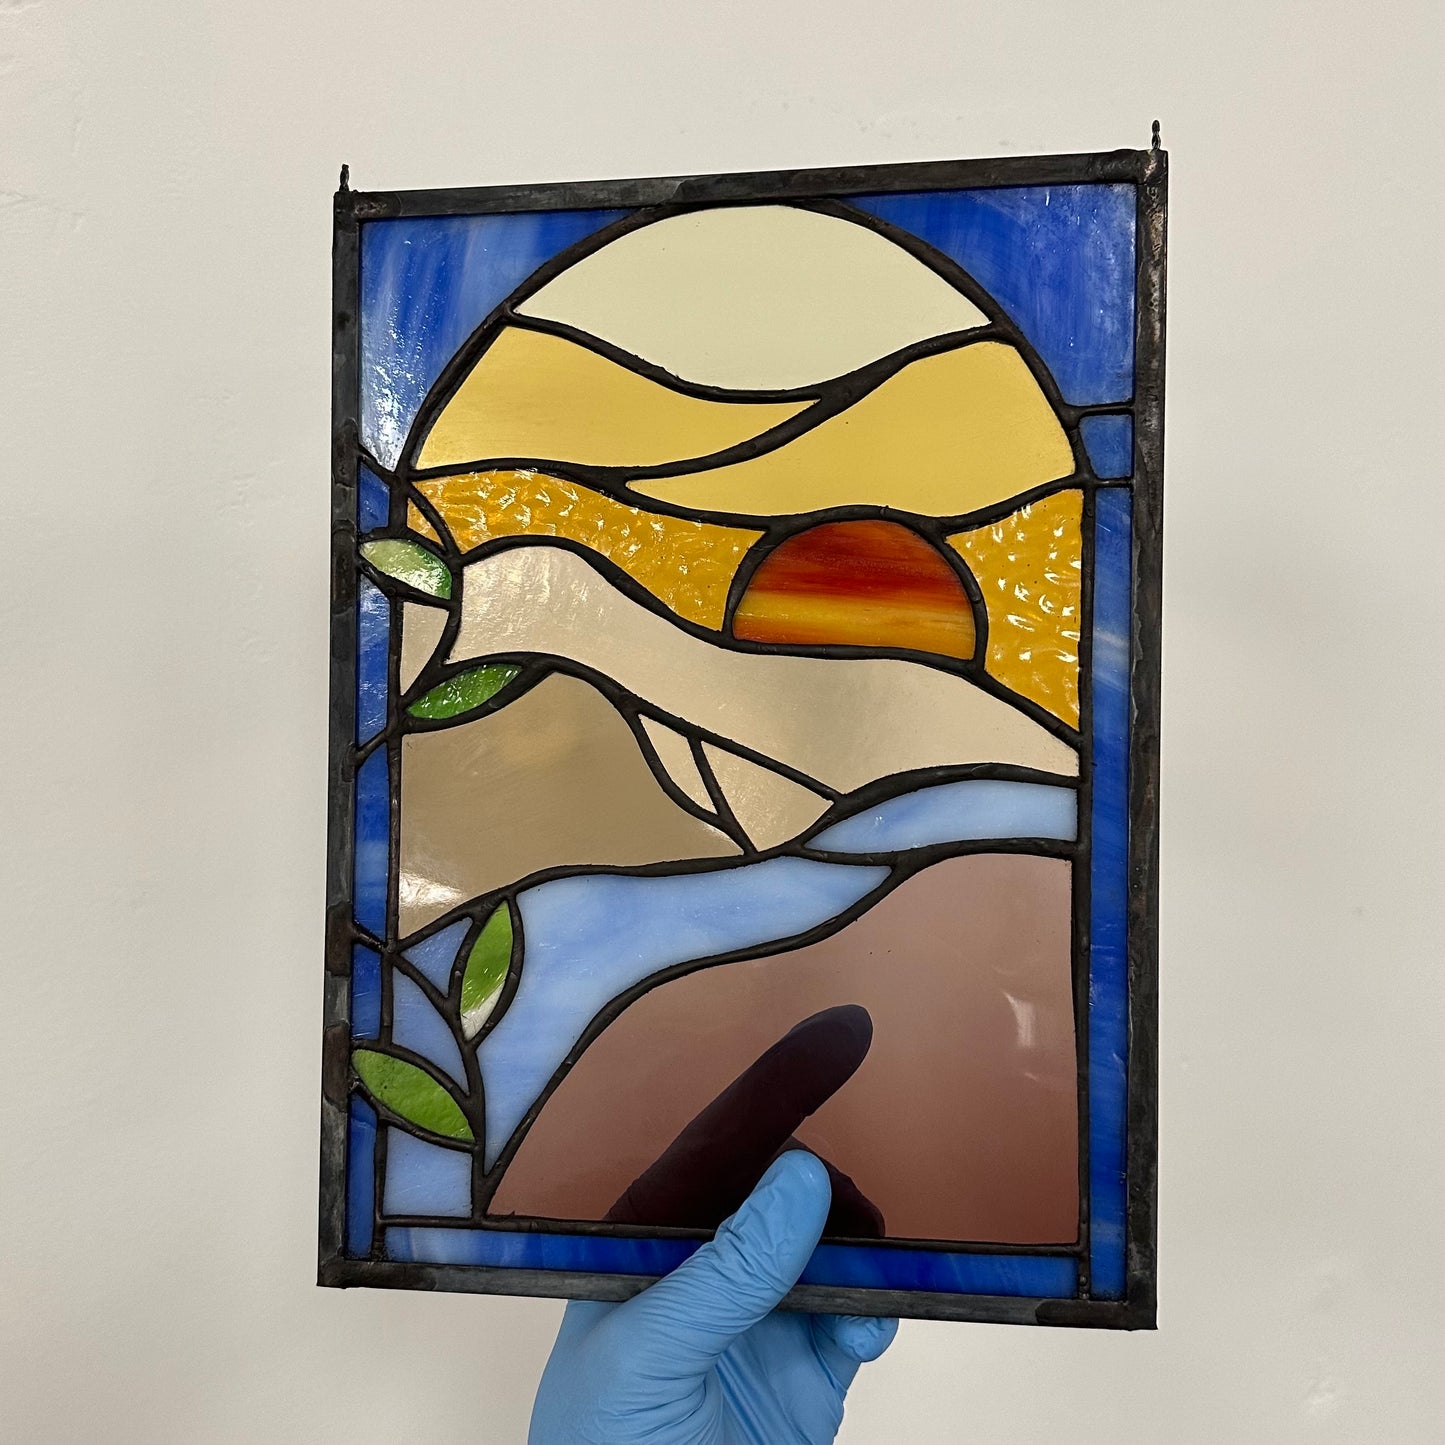 Monday nights - beginner stained glass course